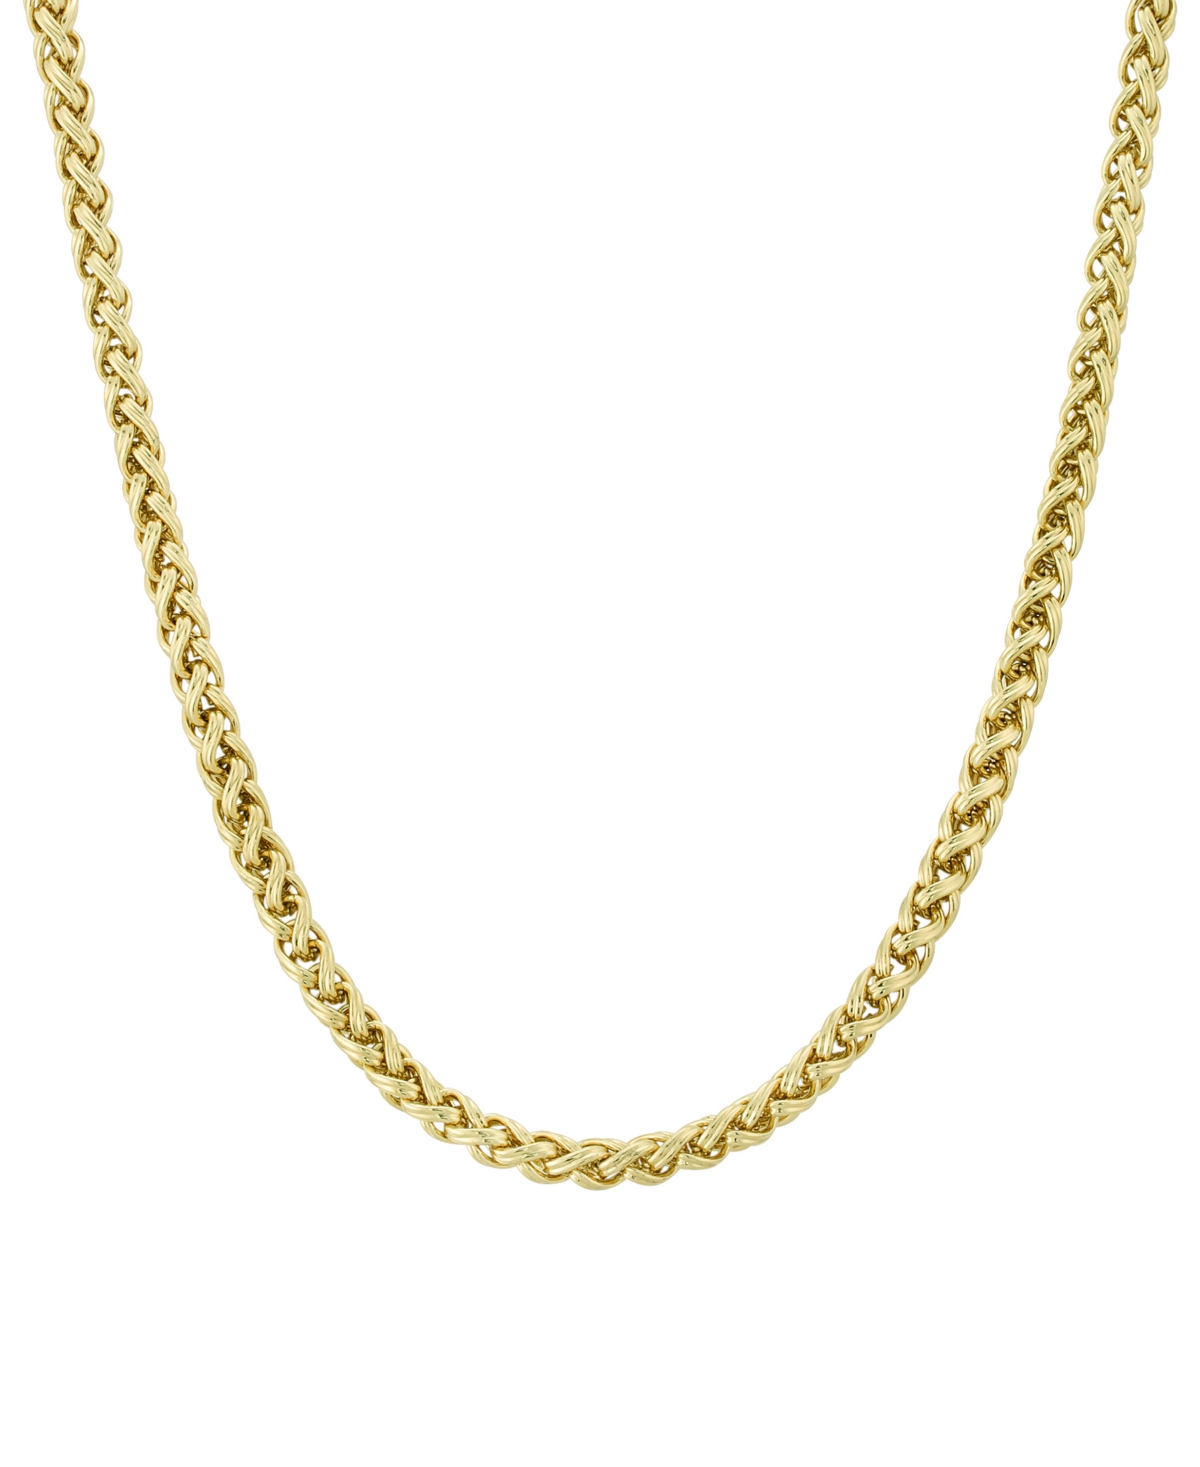 2028 Gold-tone Chain 16" Adjustable Necklace In Yellow